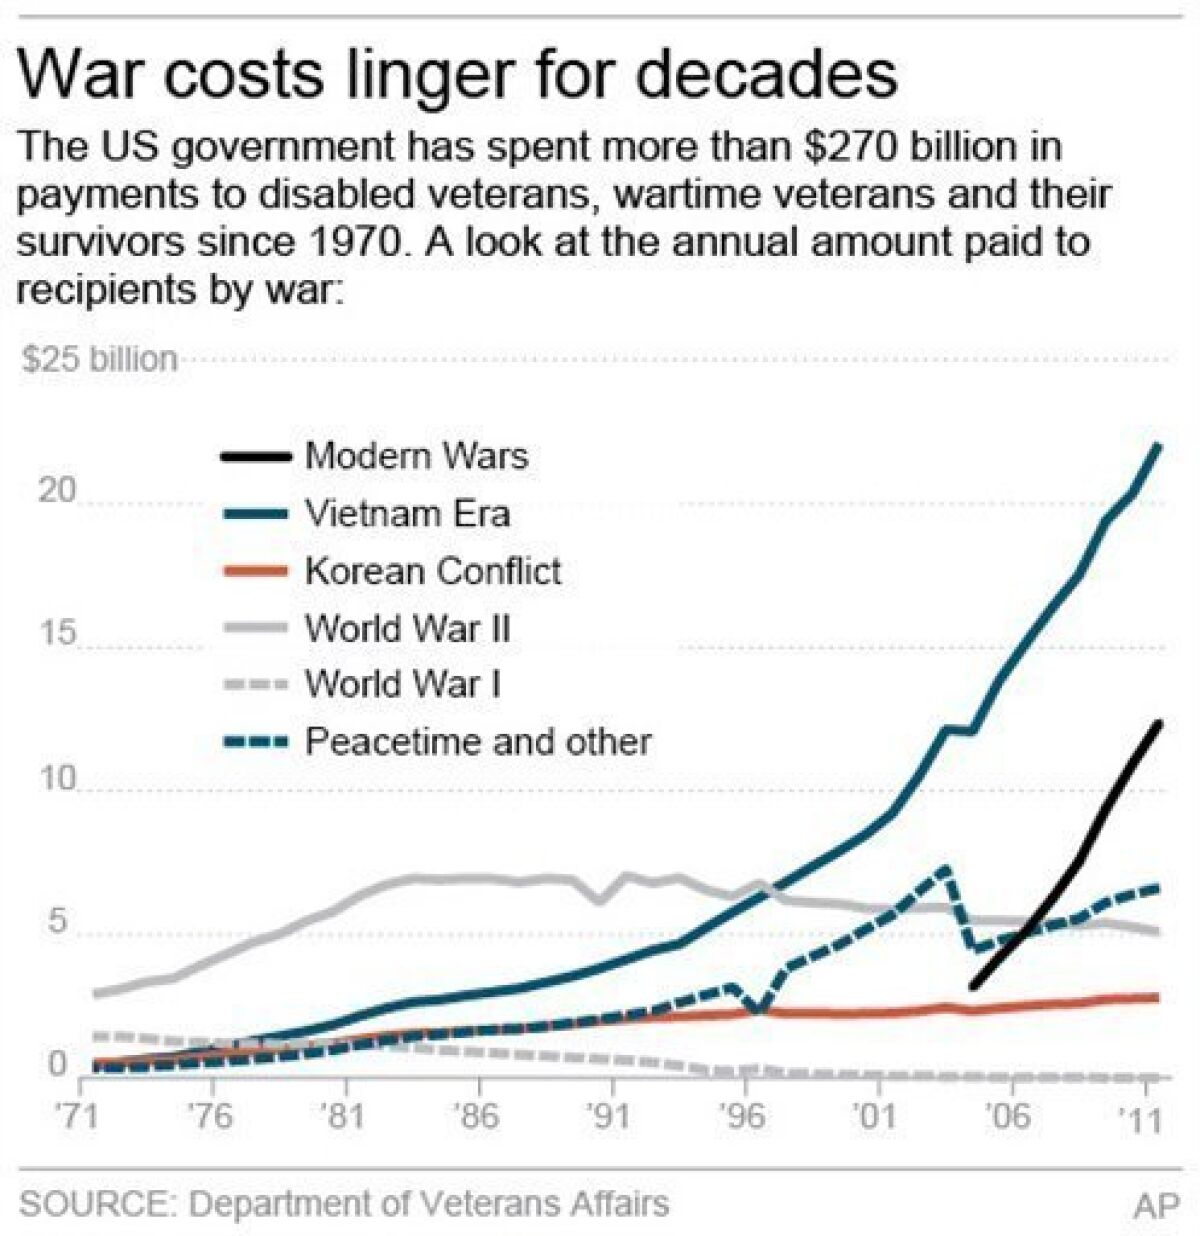 Chart shows the amount the US Government spends in payments to disabled veterans, wartime veterans and their survivors since 1970.